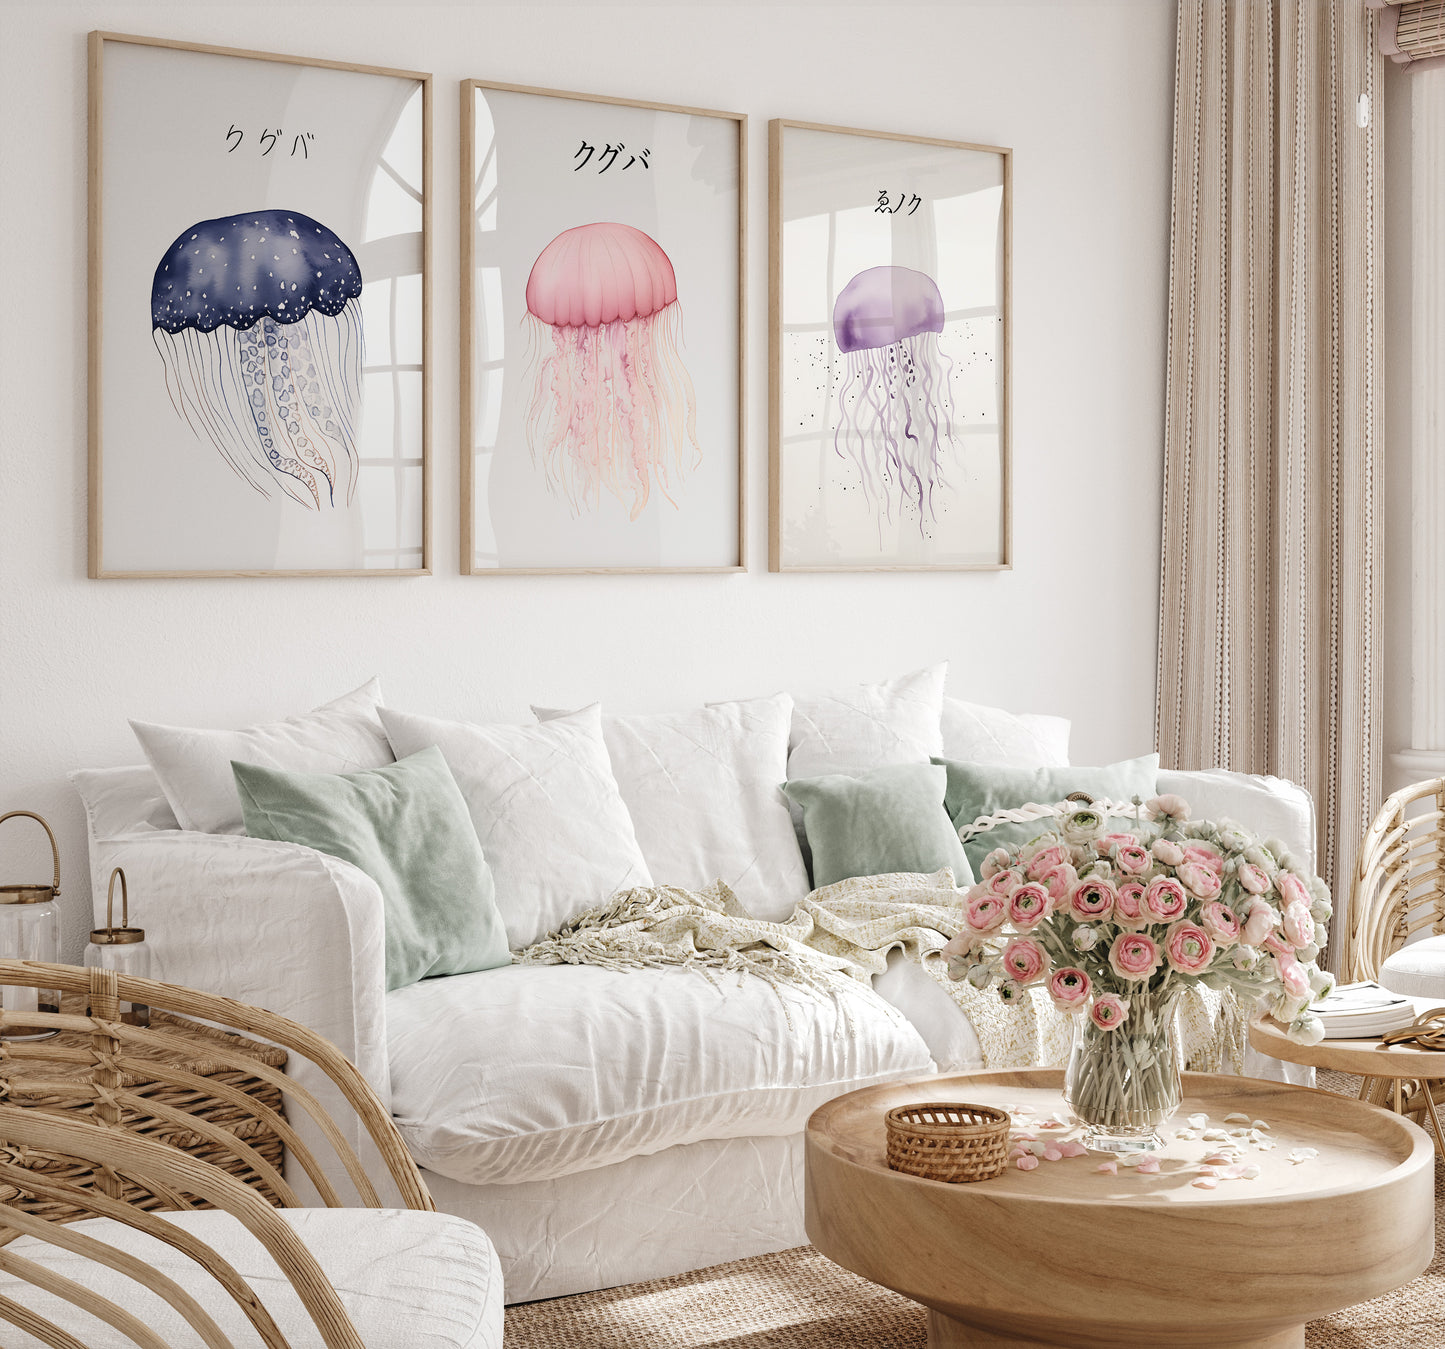 Three framed jellyfish illustrations above a cozy sofa in a bright, chic living room.